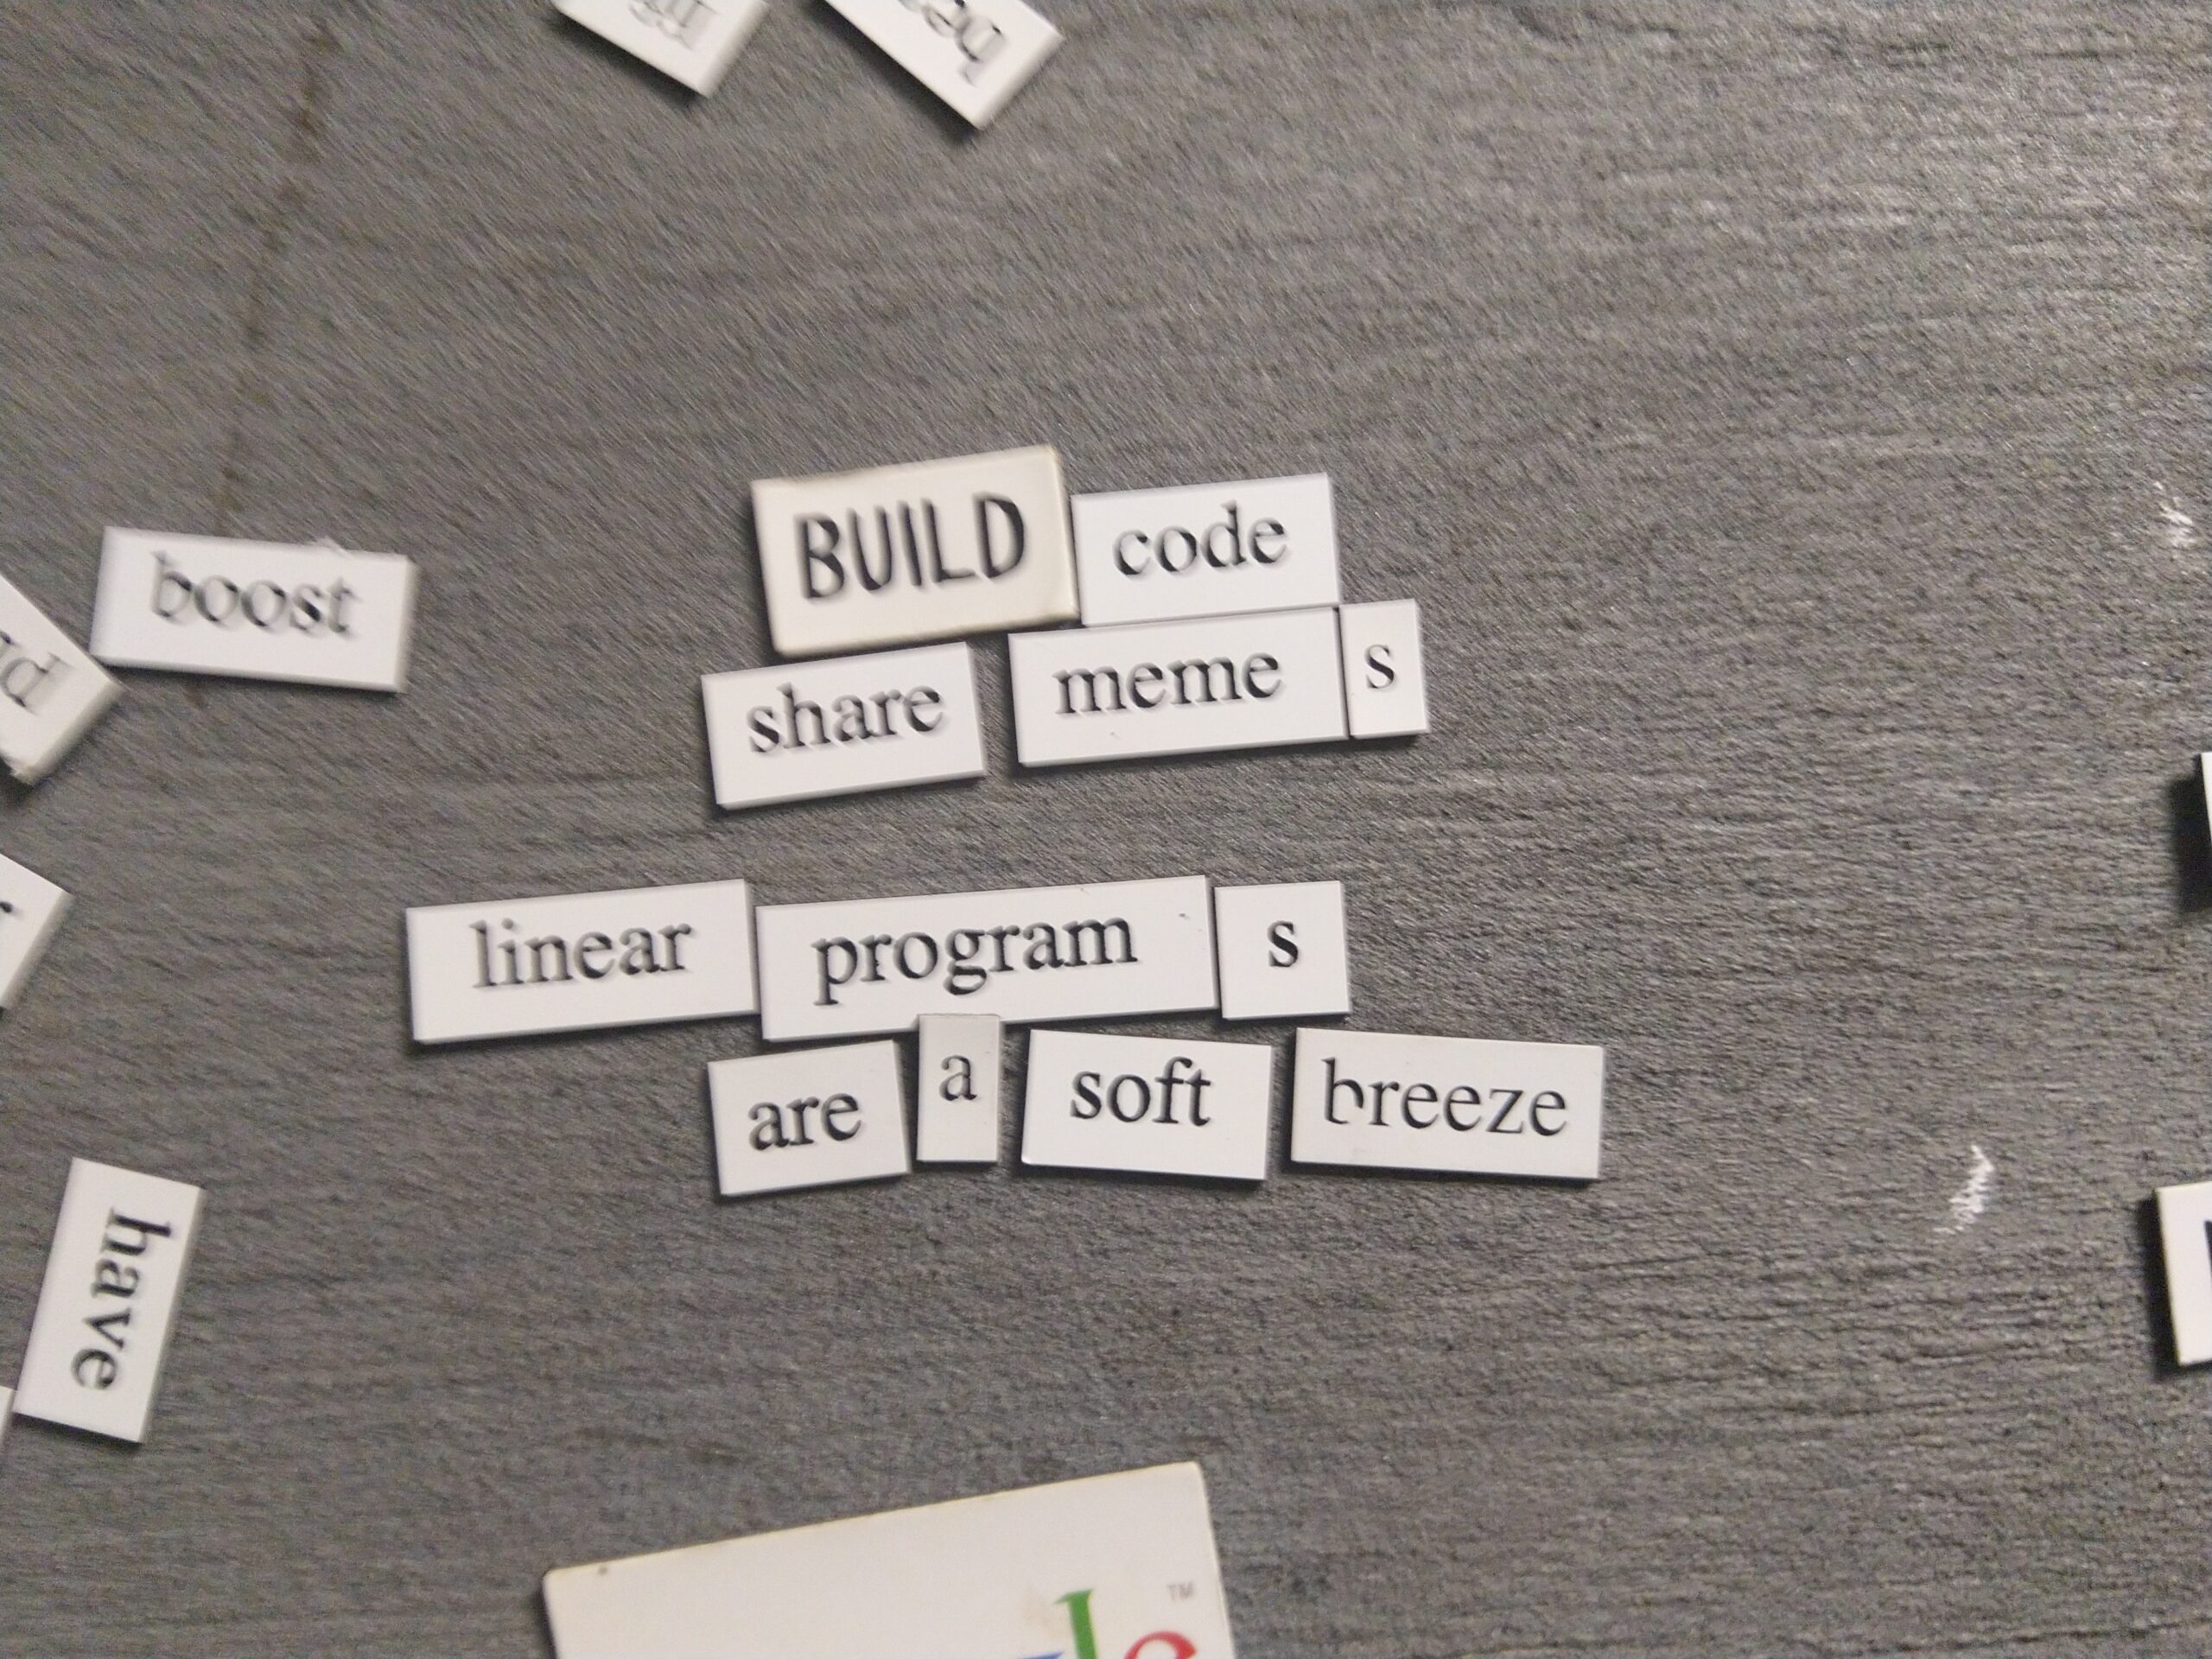 magnetic poetry: build code / share memes / linear programs / are a soft breeze